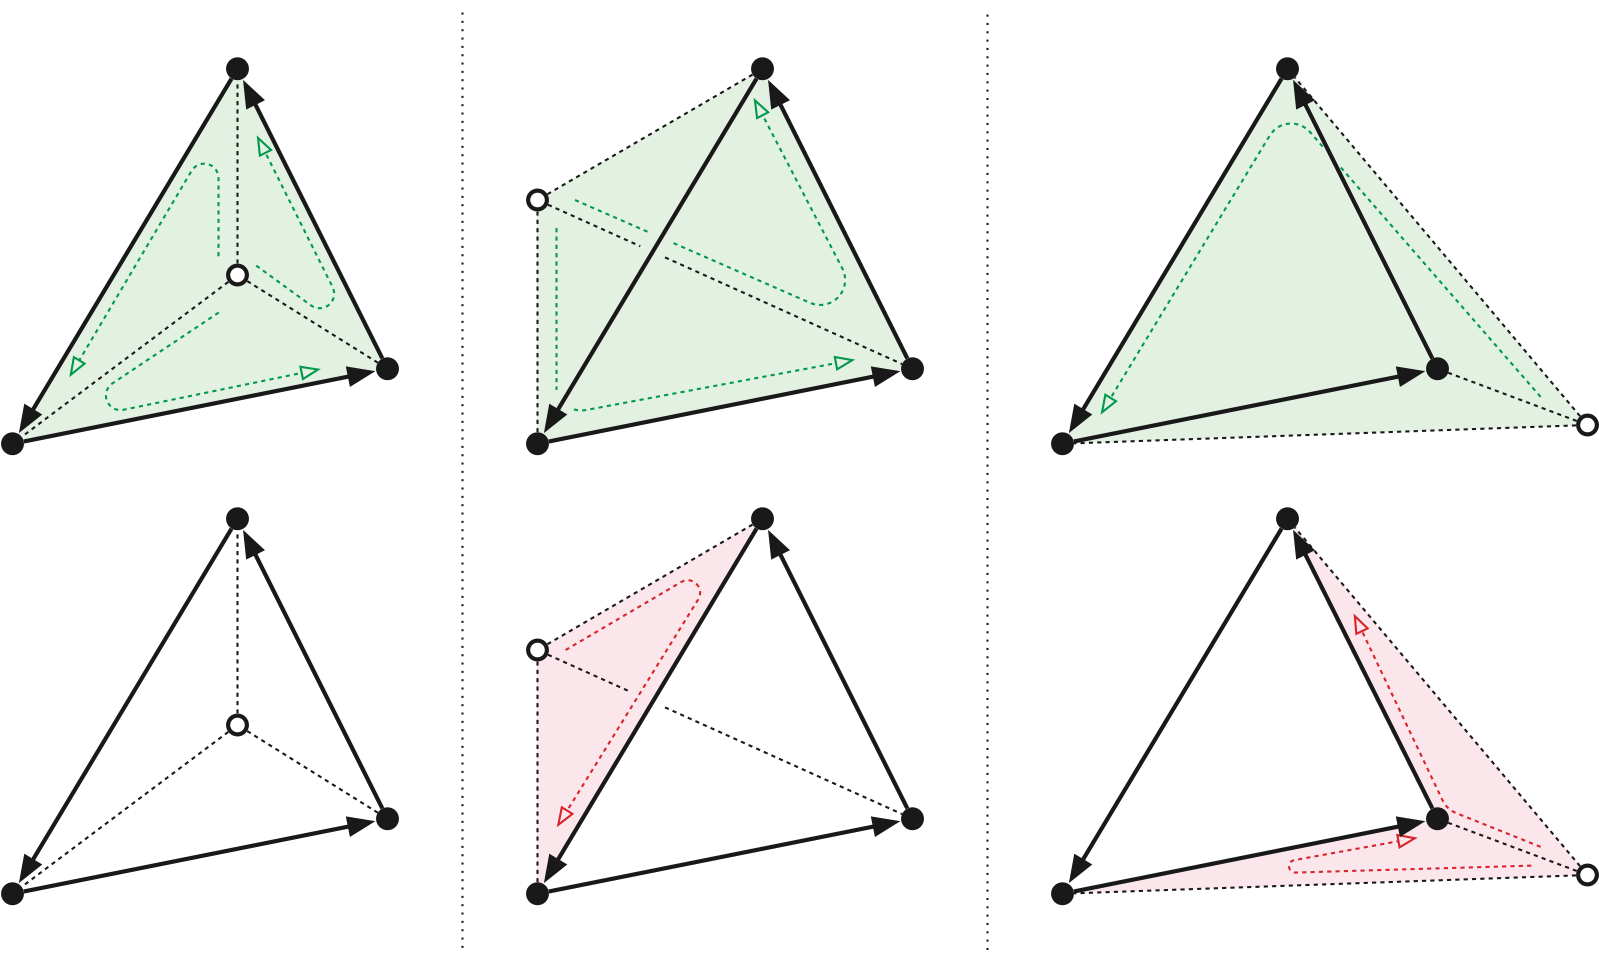 Lacing a triangle: Add the green (counterclockwise) triangles and subtract the pink (clockwise) triangles.